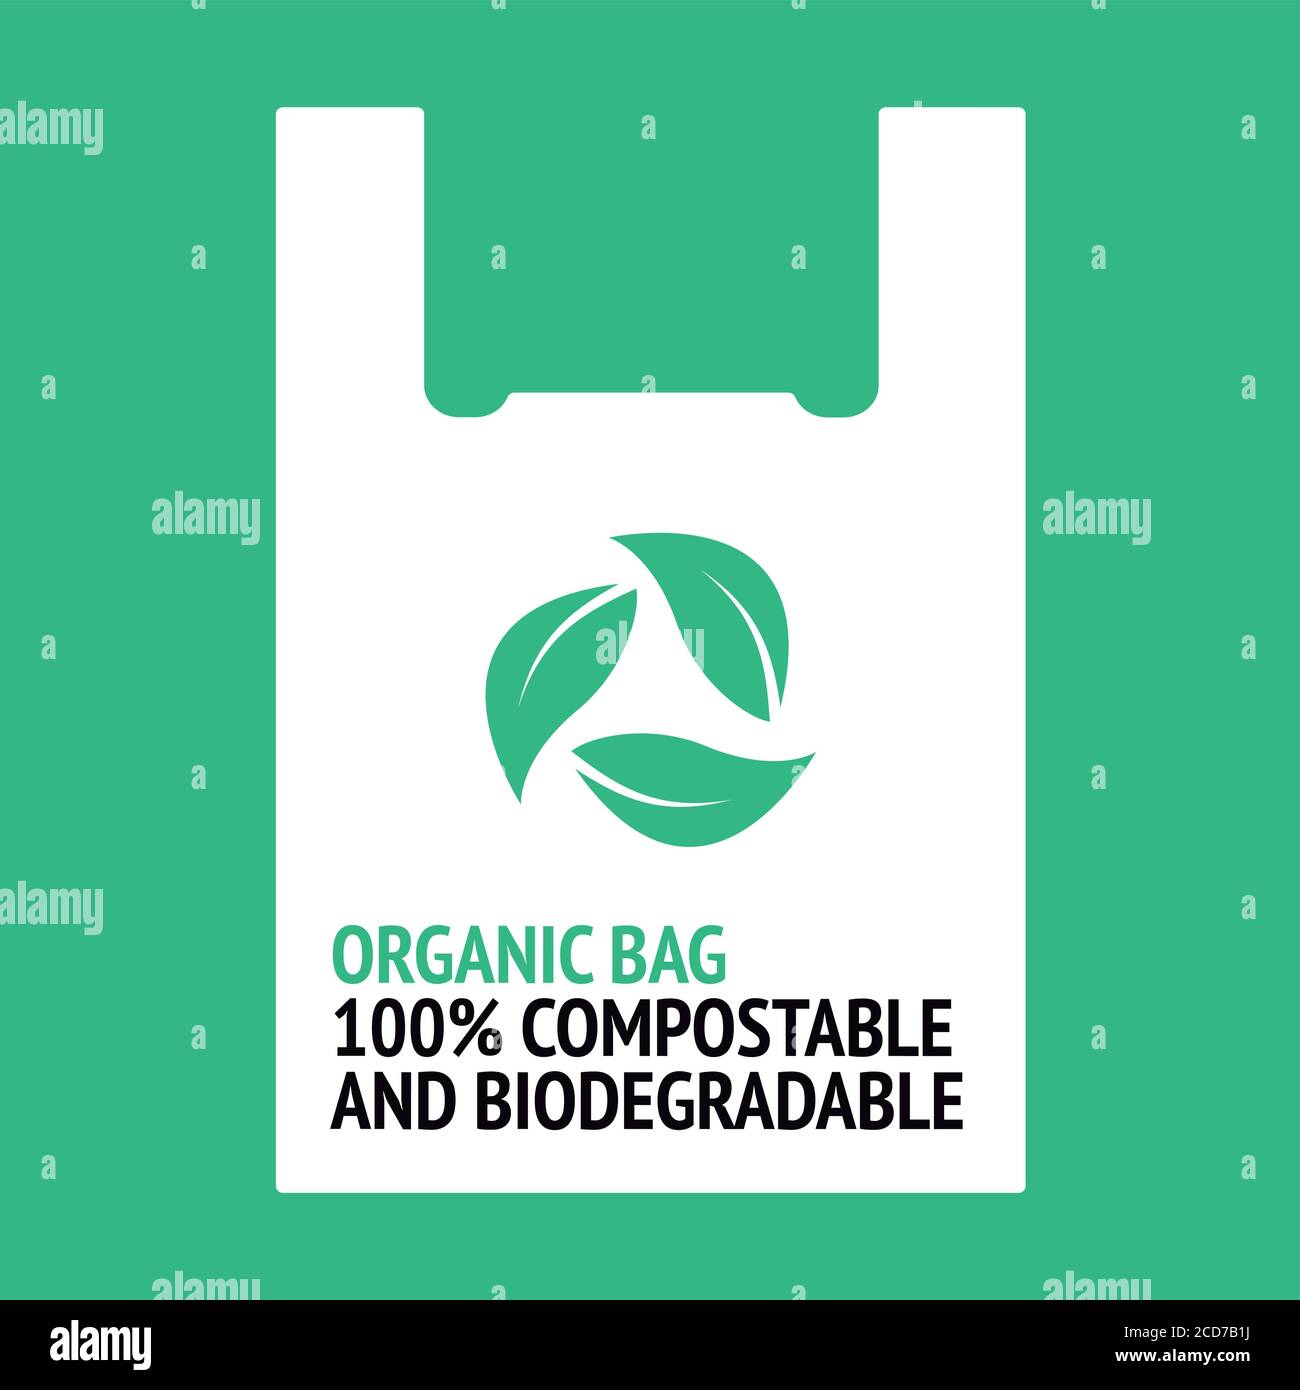 Design for organic bag. 100% biodegradable and compostable. Plastic free. Stock Vector